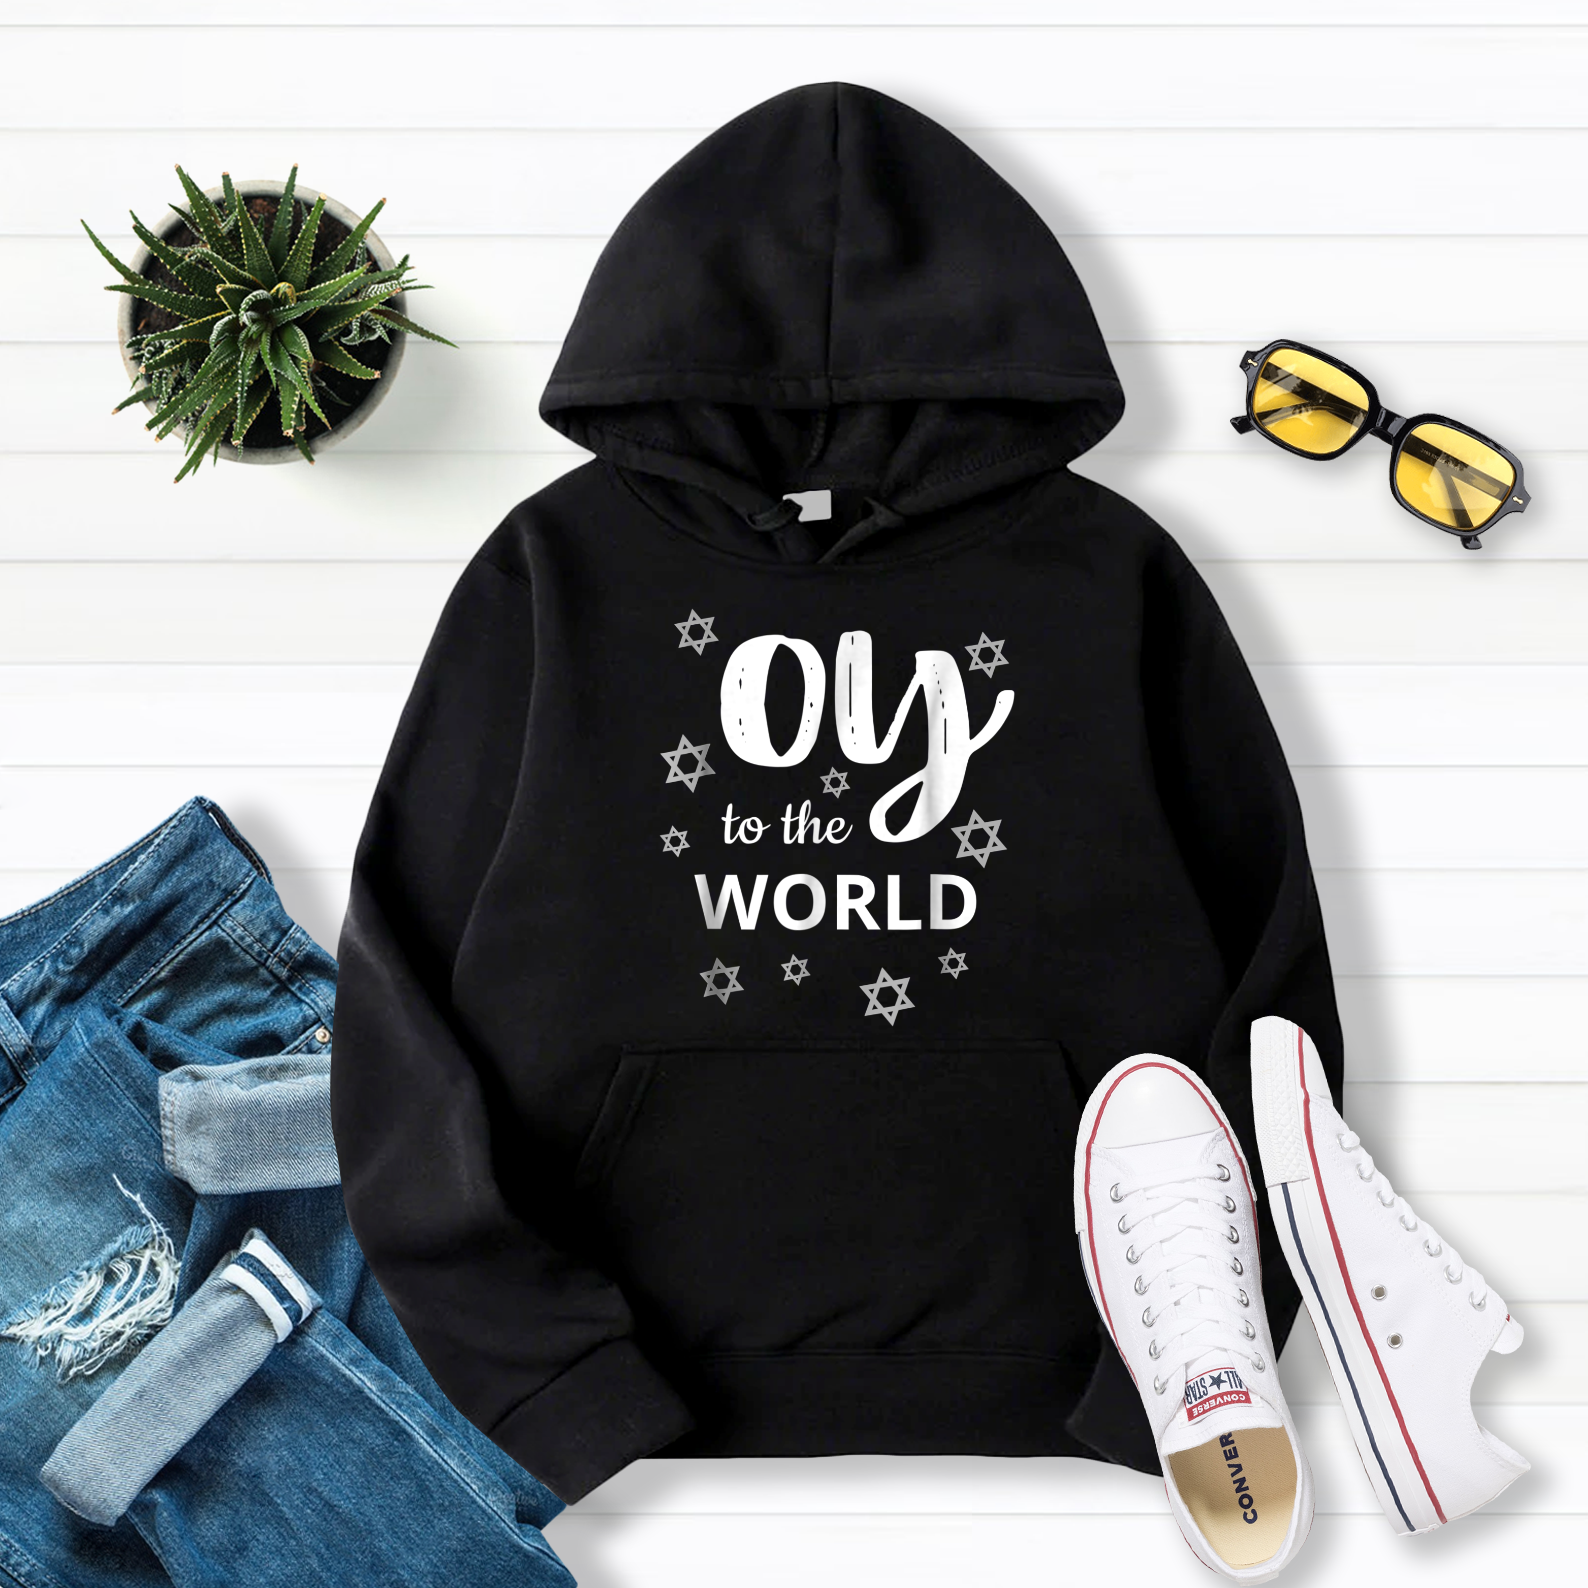 Hanukkah Oy To The World Funny Jewish Xmas Party Pullover Hoodie Black S-5XL